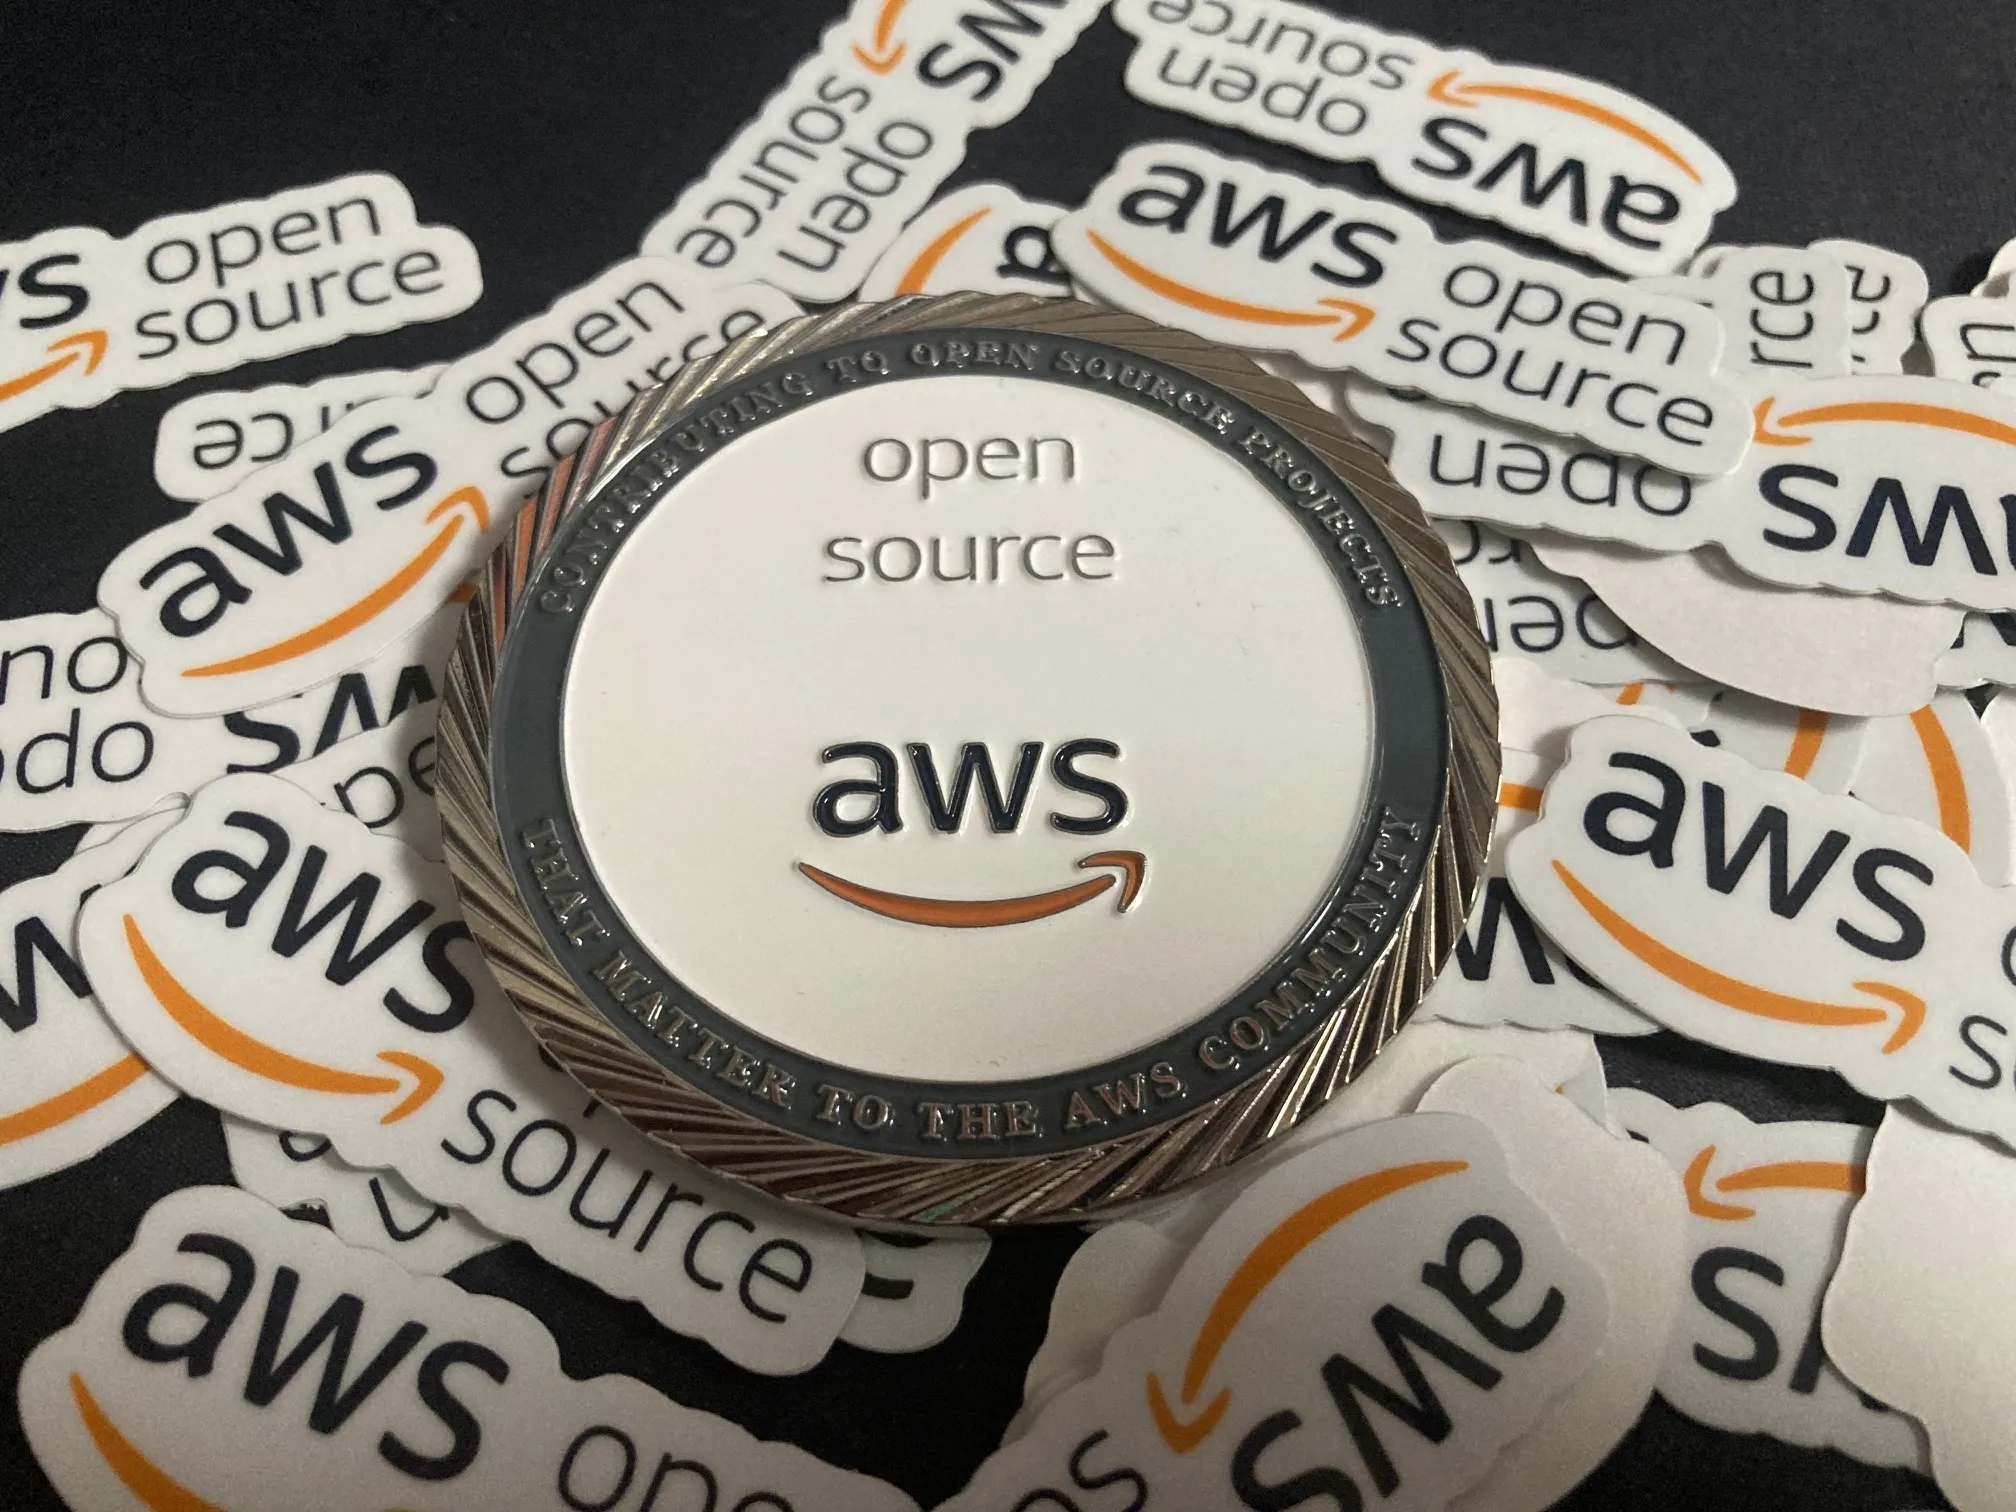 a picture of open source at aws stickers and the exclusive aws open source challenge coin